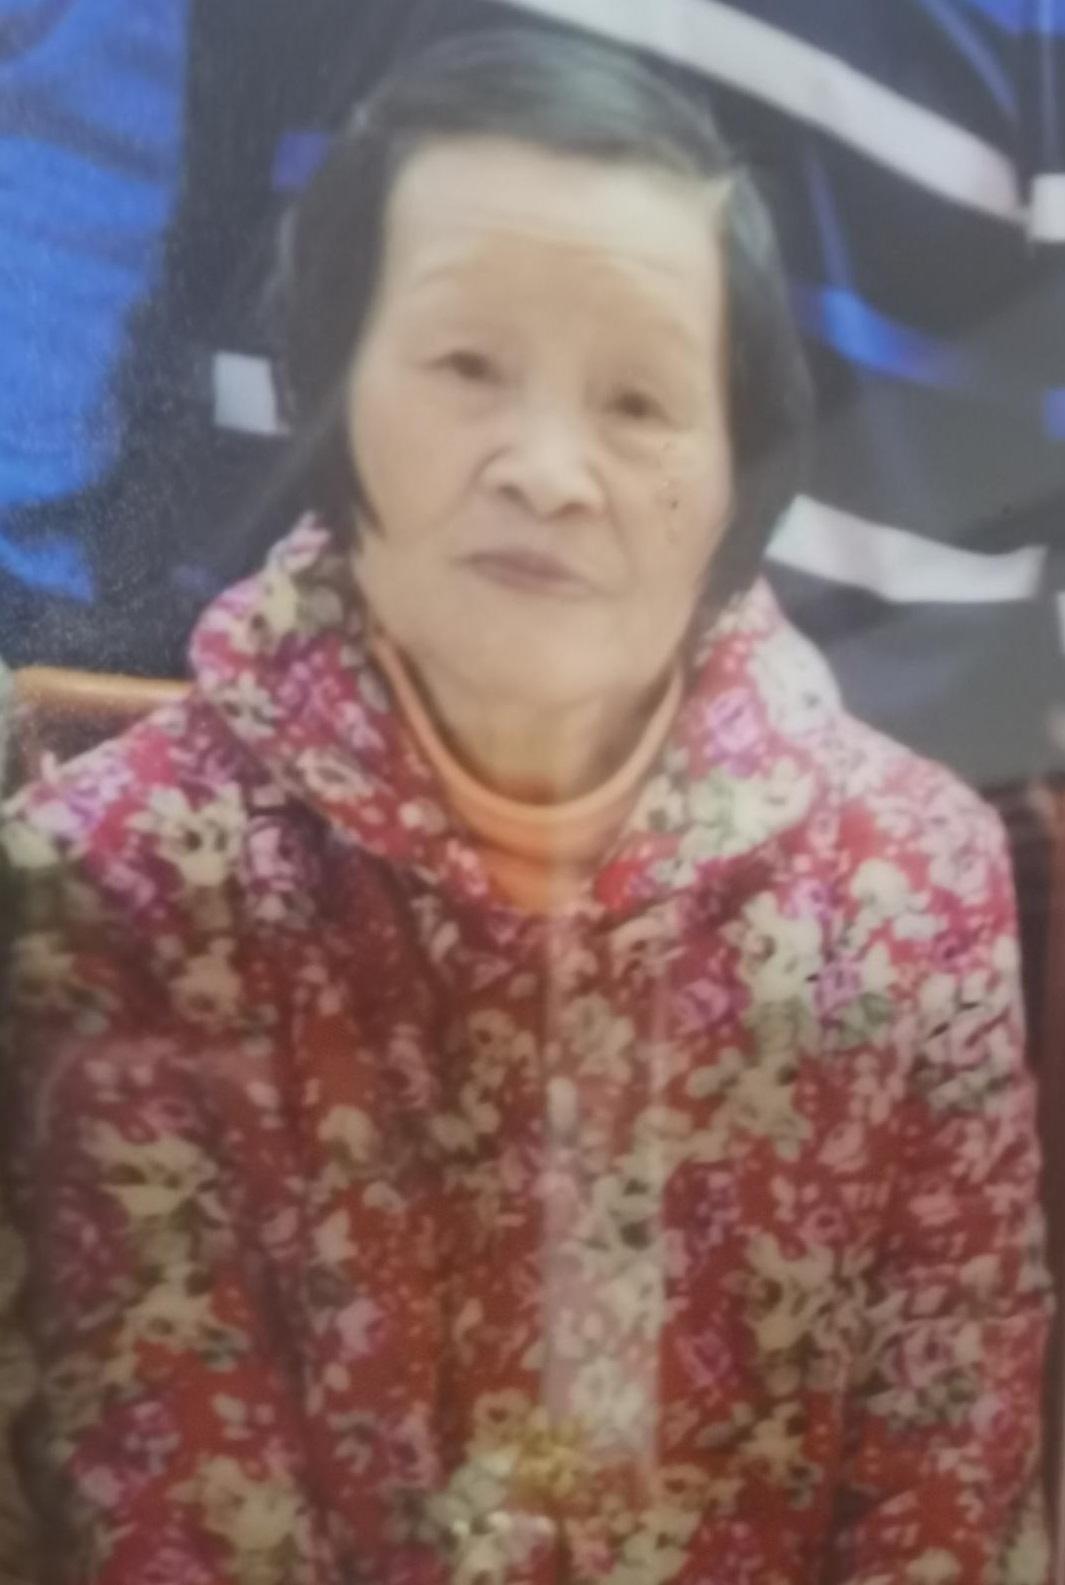 Missing woman Yu Yuen-tai, aged 79, is about 1.45 metres tall, 40 kilograms in weight and of thin build. She has a square face with yellow complexion and short grey hair. She was last seen wearing a blue short-sleeved shirt with floral pattern, black trousers, red sports shoes and carrying a walking stick.